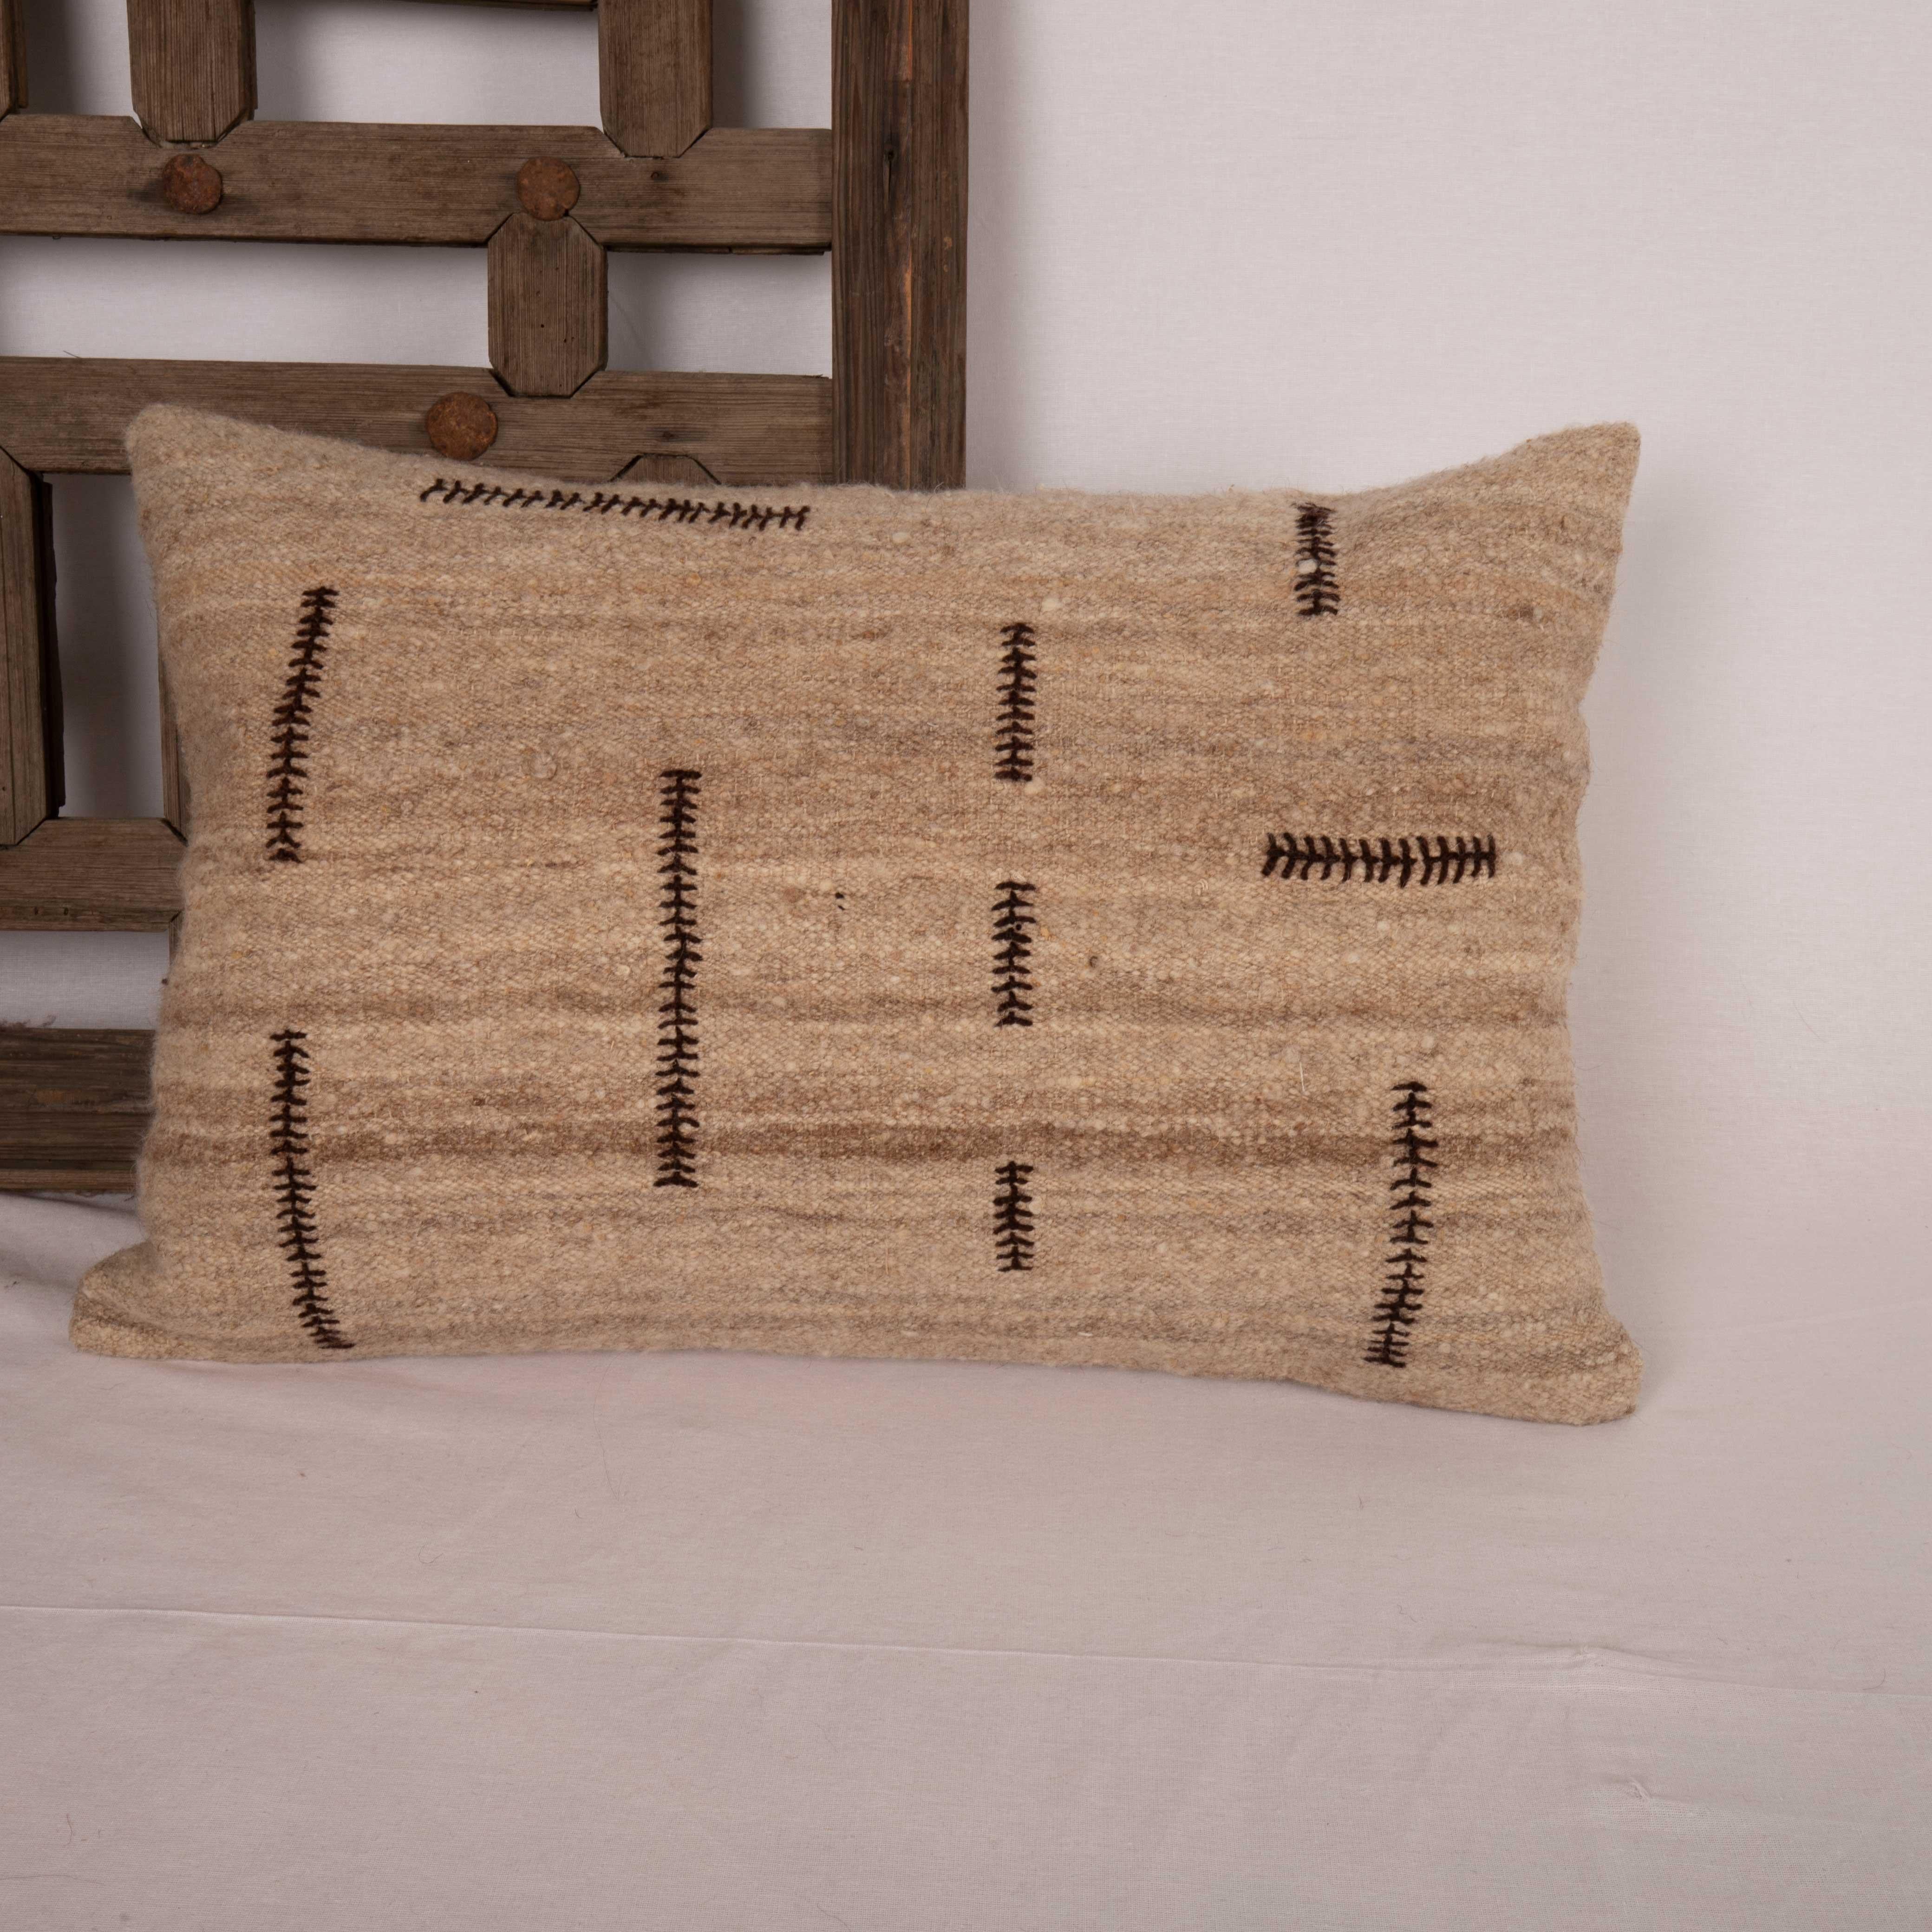 The materials this pillowcase is made from purely natural , undyed wool, dating back to mid 20th C.
Embroidered design elements on it are our design and they are purely hand done on the vintage materials.
It does not come with an insert.
Linen in